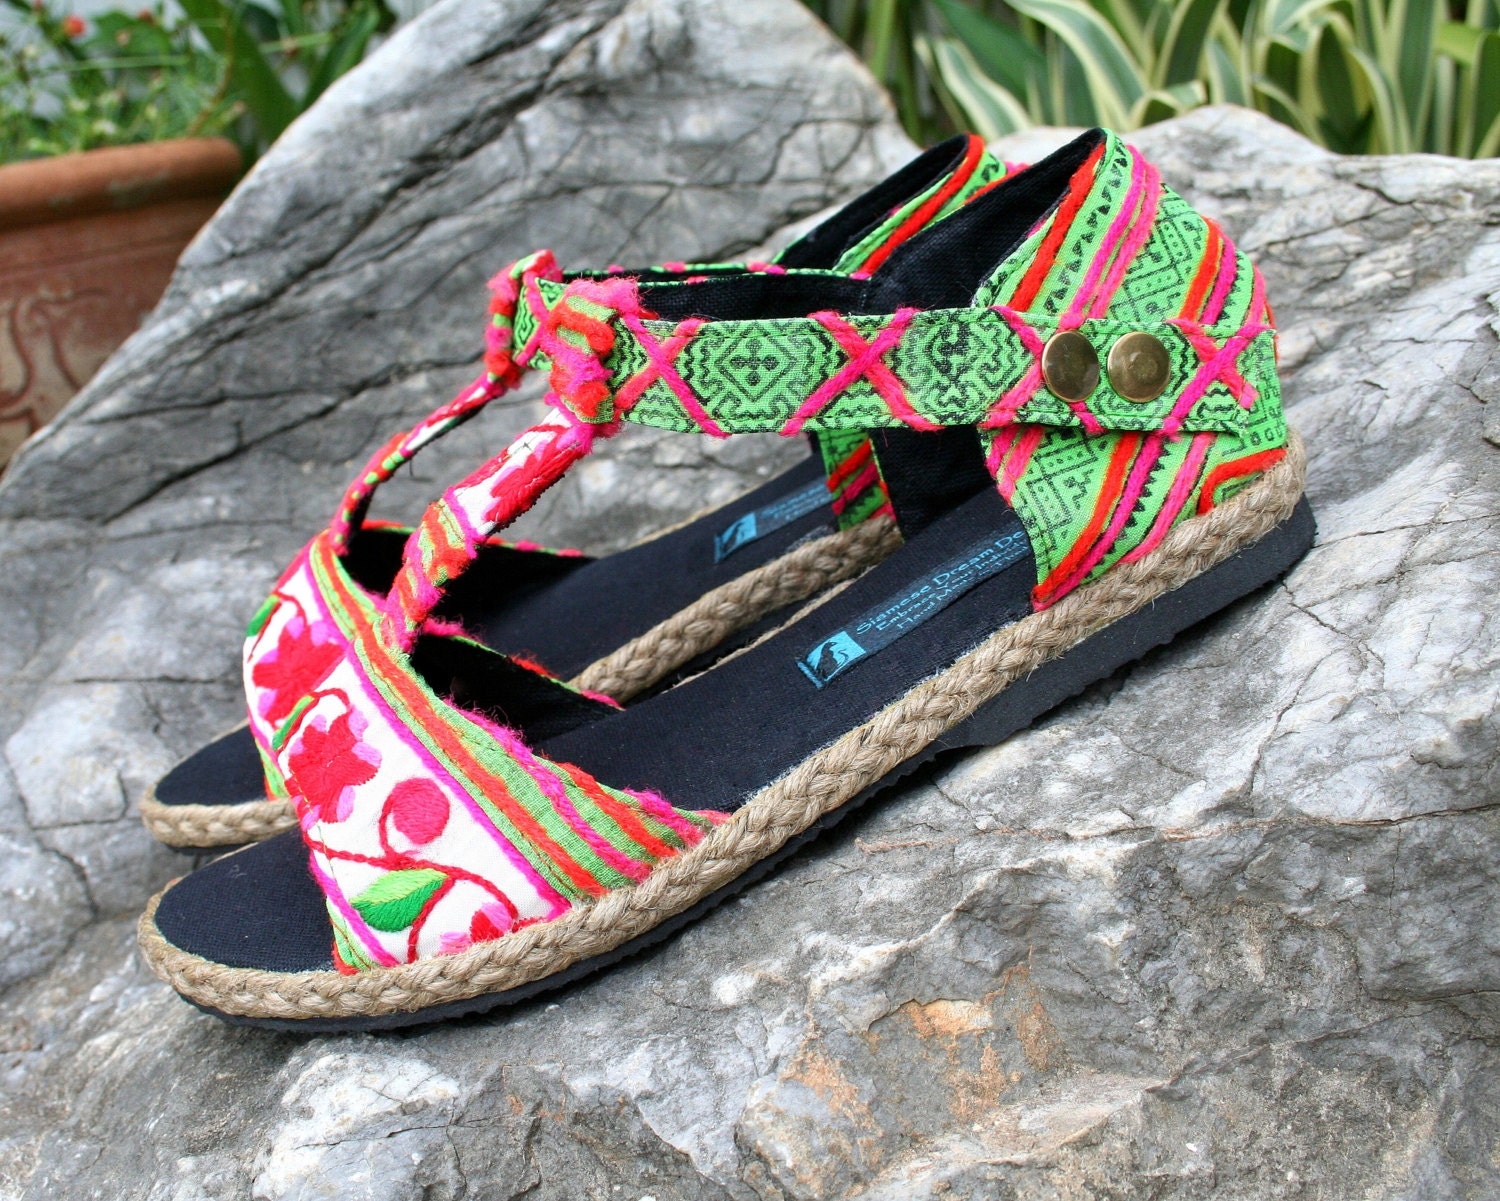 Vegan Womens Sandals Floral T Strap In Ethnic Hmong